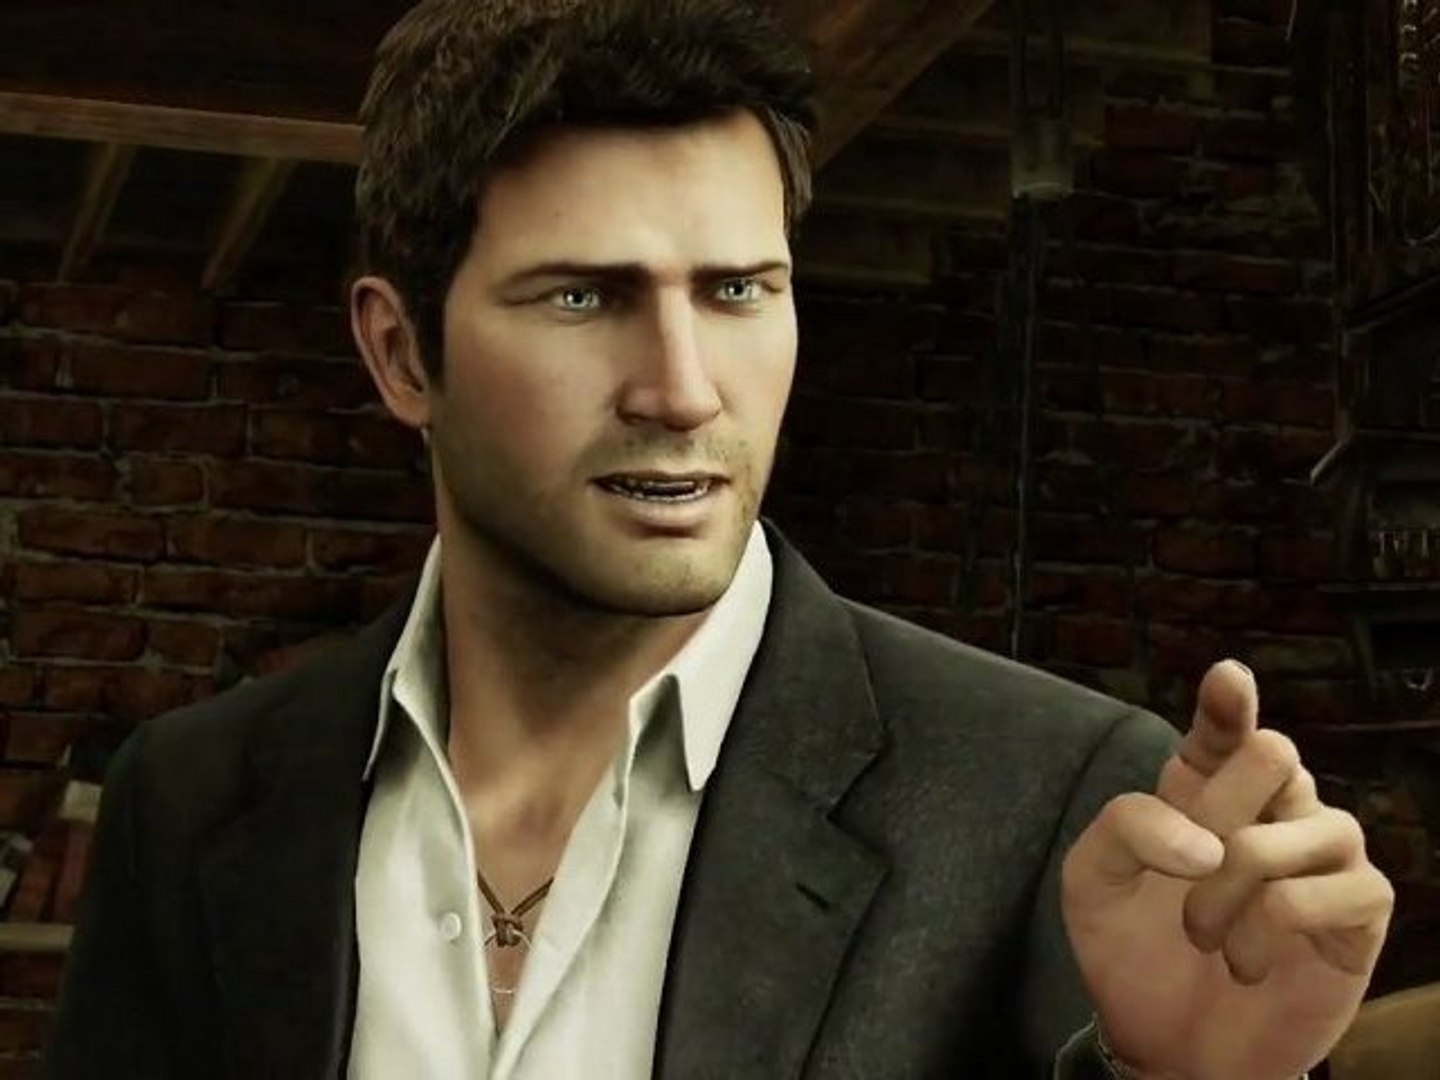 Uncharted 3: Drake's Deception GOTY Edition Now Available - The Game  Fanatics